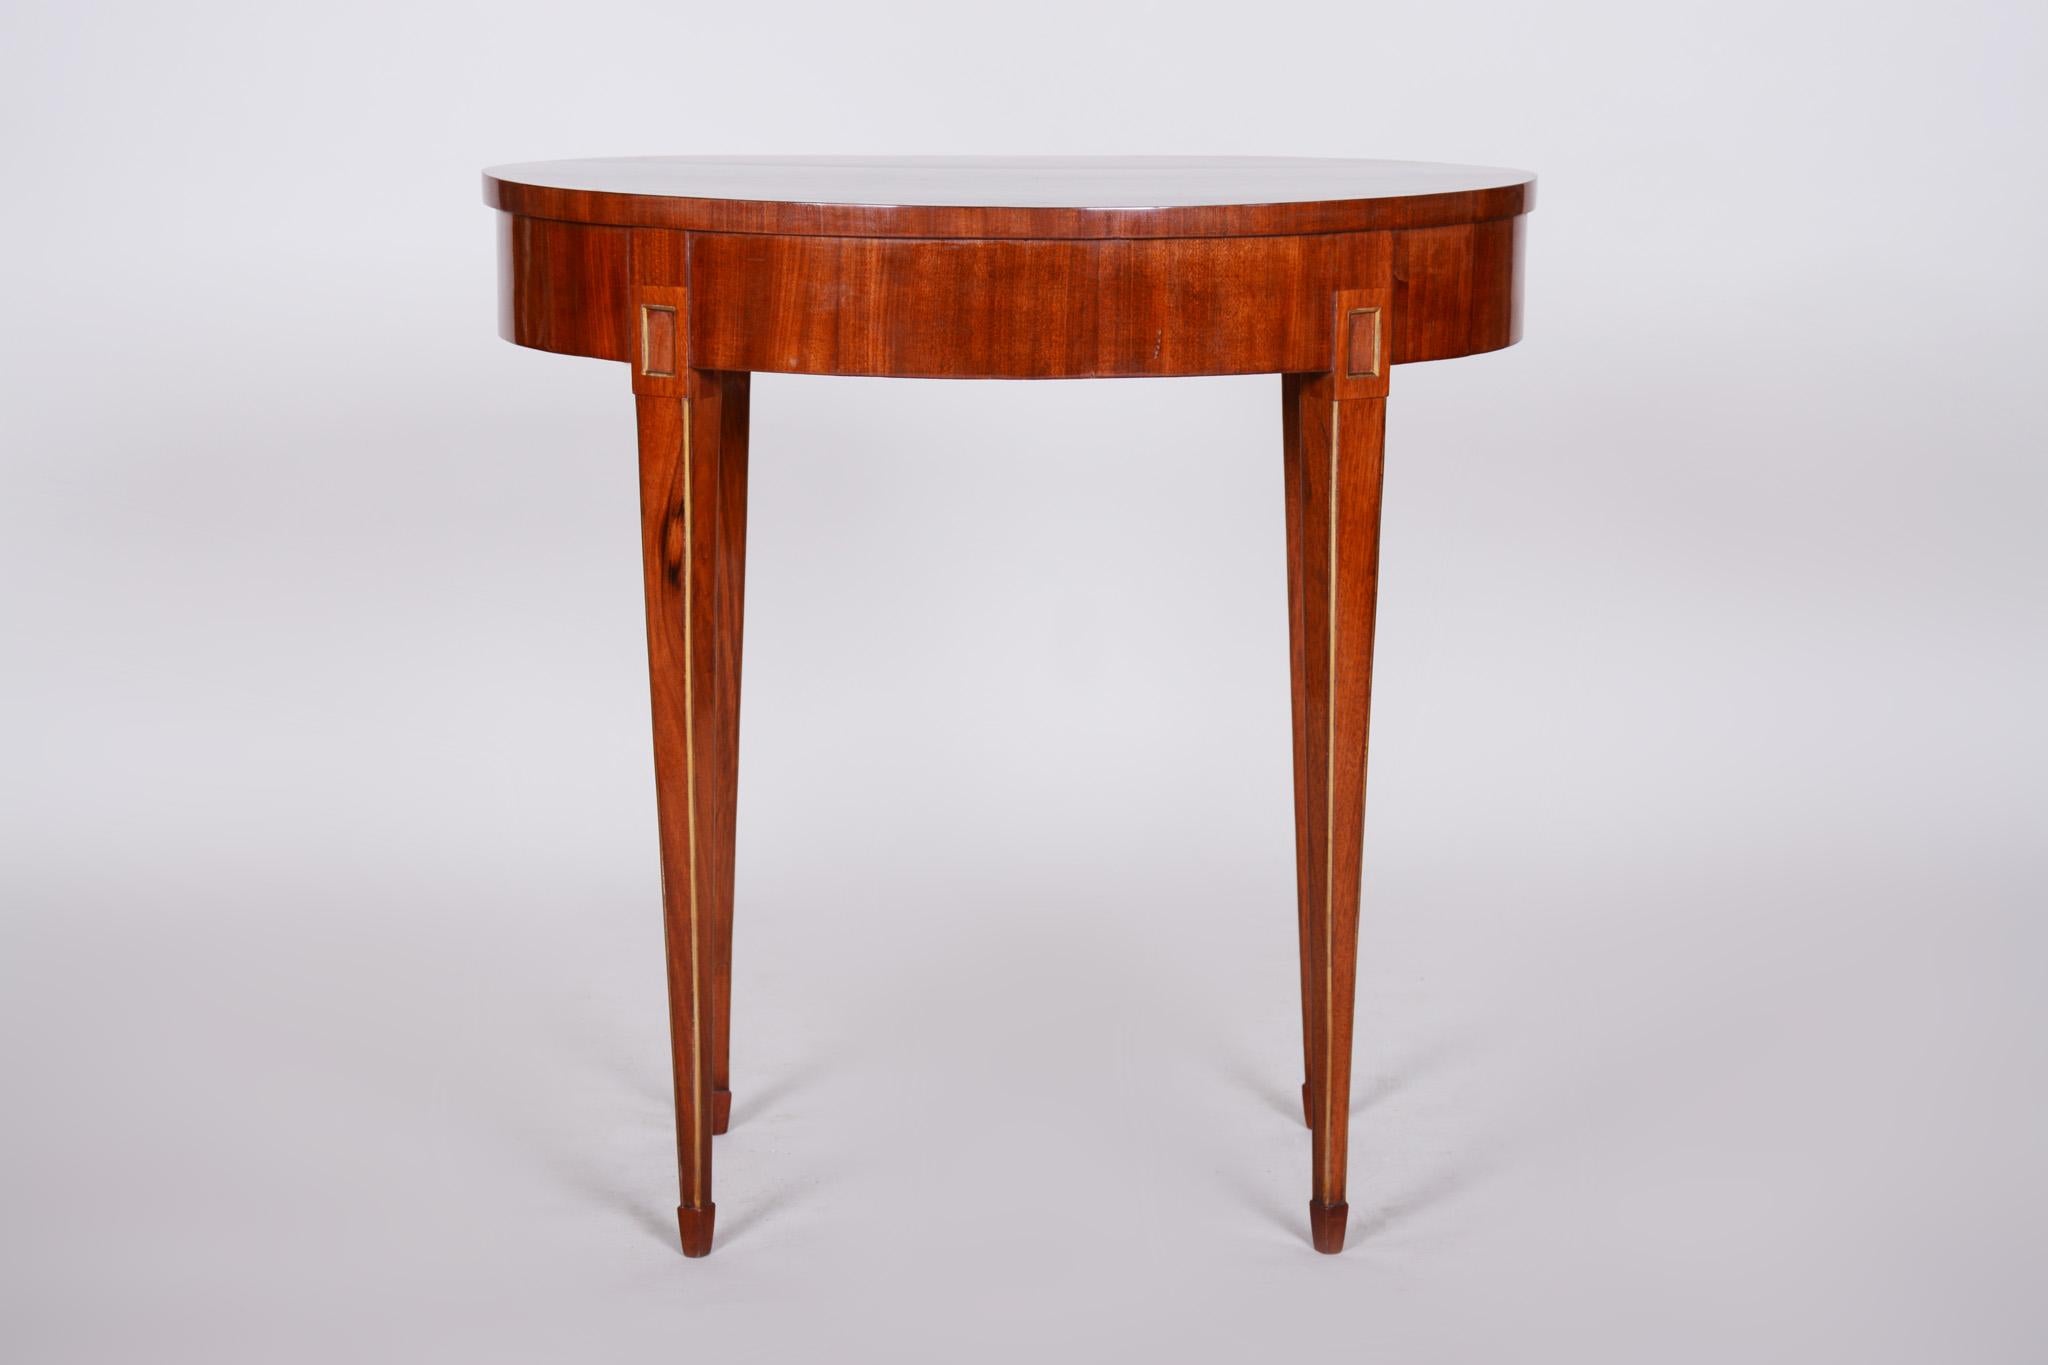 Shipping to any US port only for $290 USD

French Biedermeier small table
Period: 1840-1849
Material: Mahogany
Shellac polished.

We guarantee safe a the cheapest air transport from Europe to the whole world within 7 days.
The price is the same as